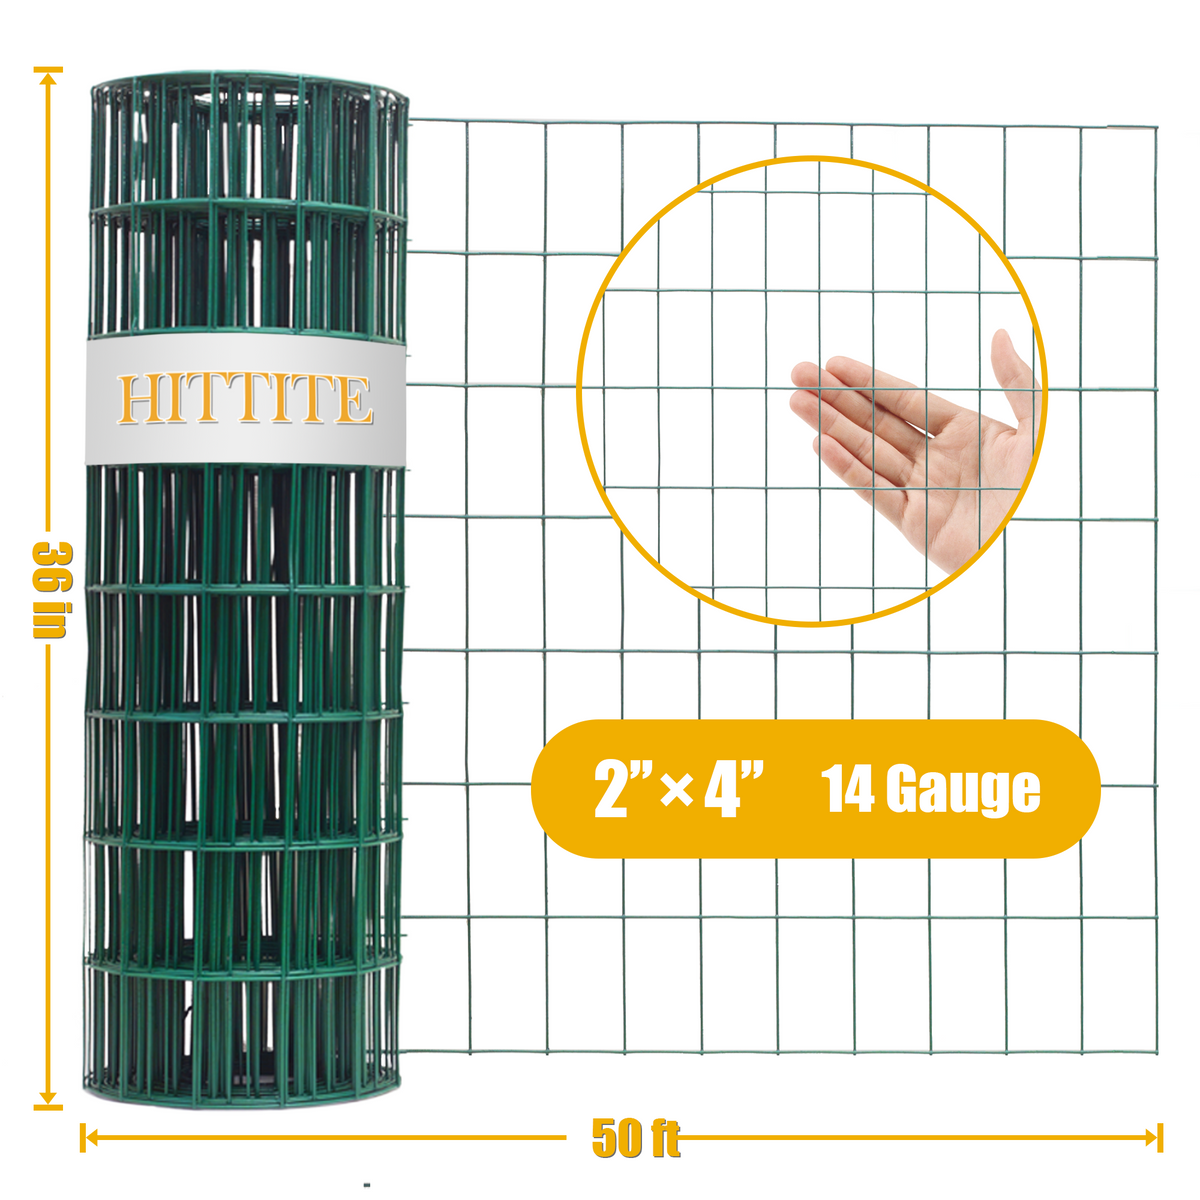 HITTITE Green PVC Coated Welded Wire Fencing, 36in x 50ft, 2 inch x 4 inch 14 GA Welded Wire Fence Rolls, Black Metal Garden Fence Wire Roll Garden Border Fencing for Yard Vegetable Plant Protection